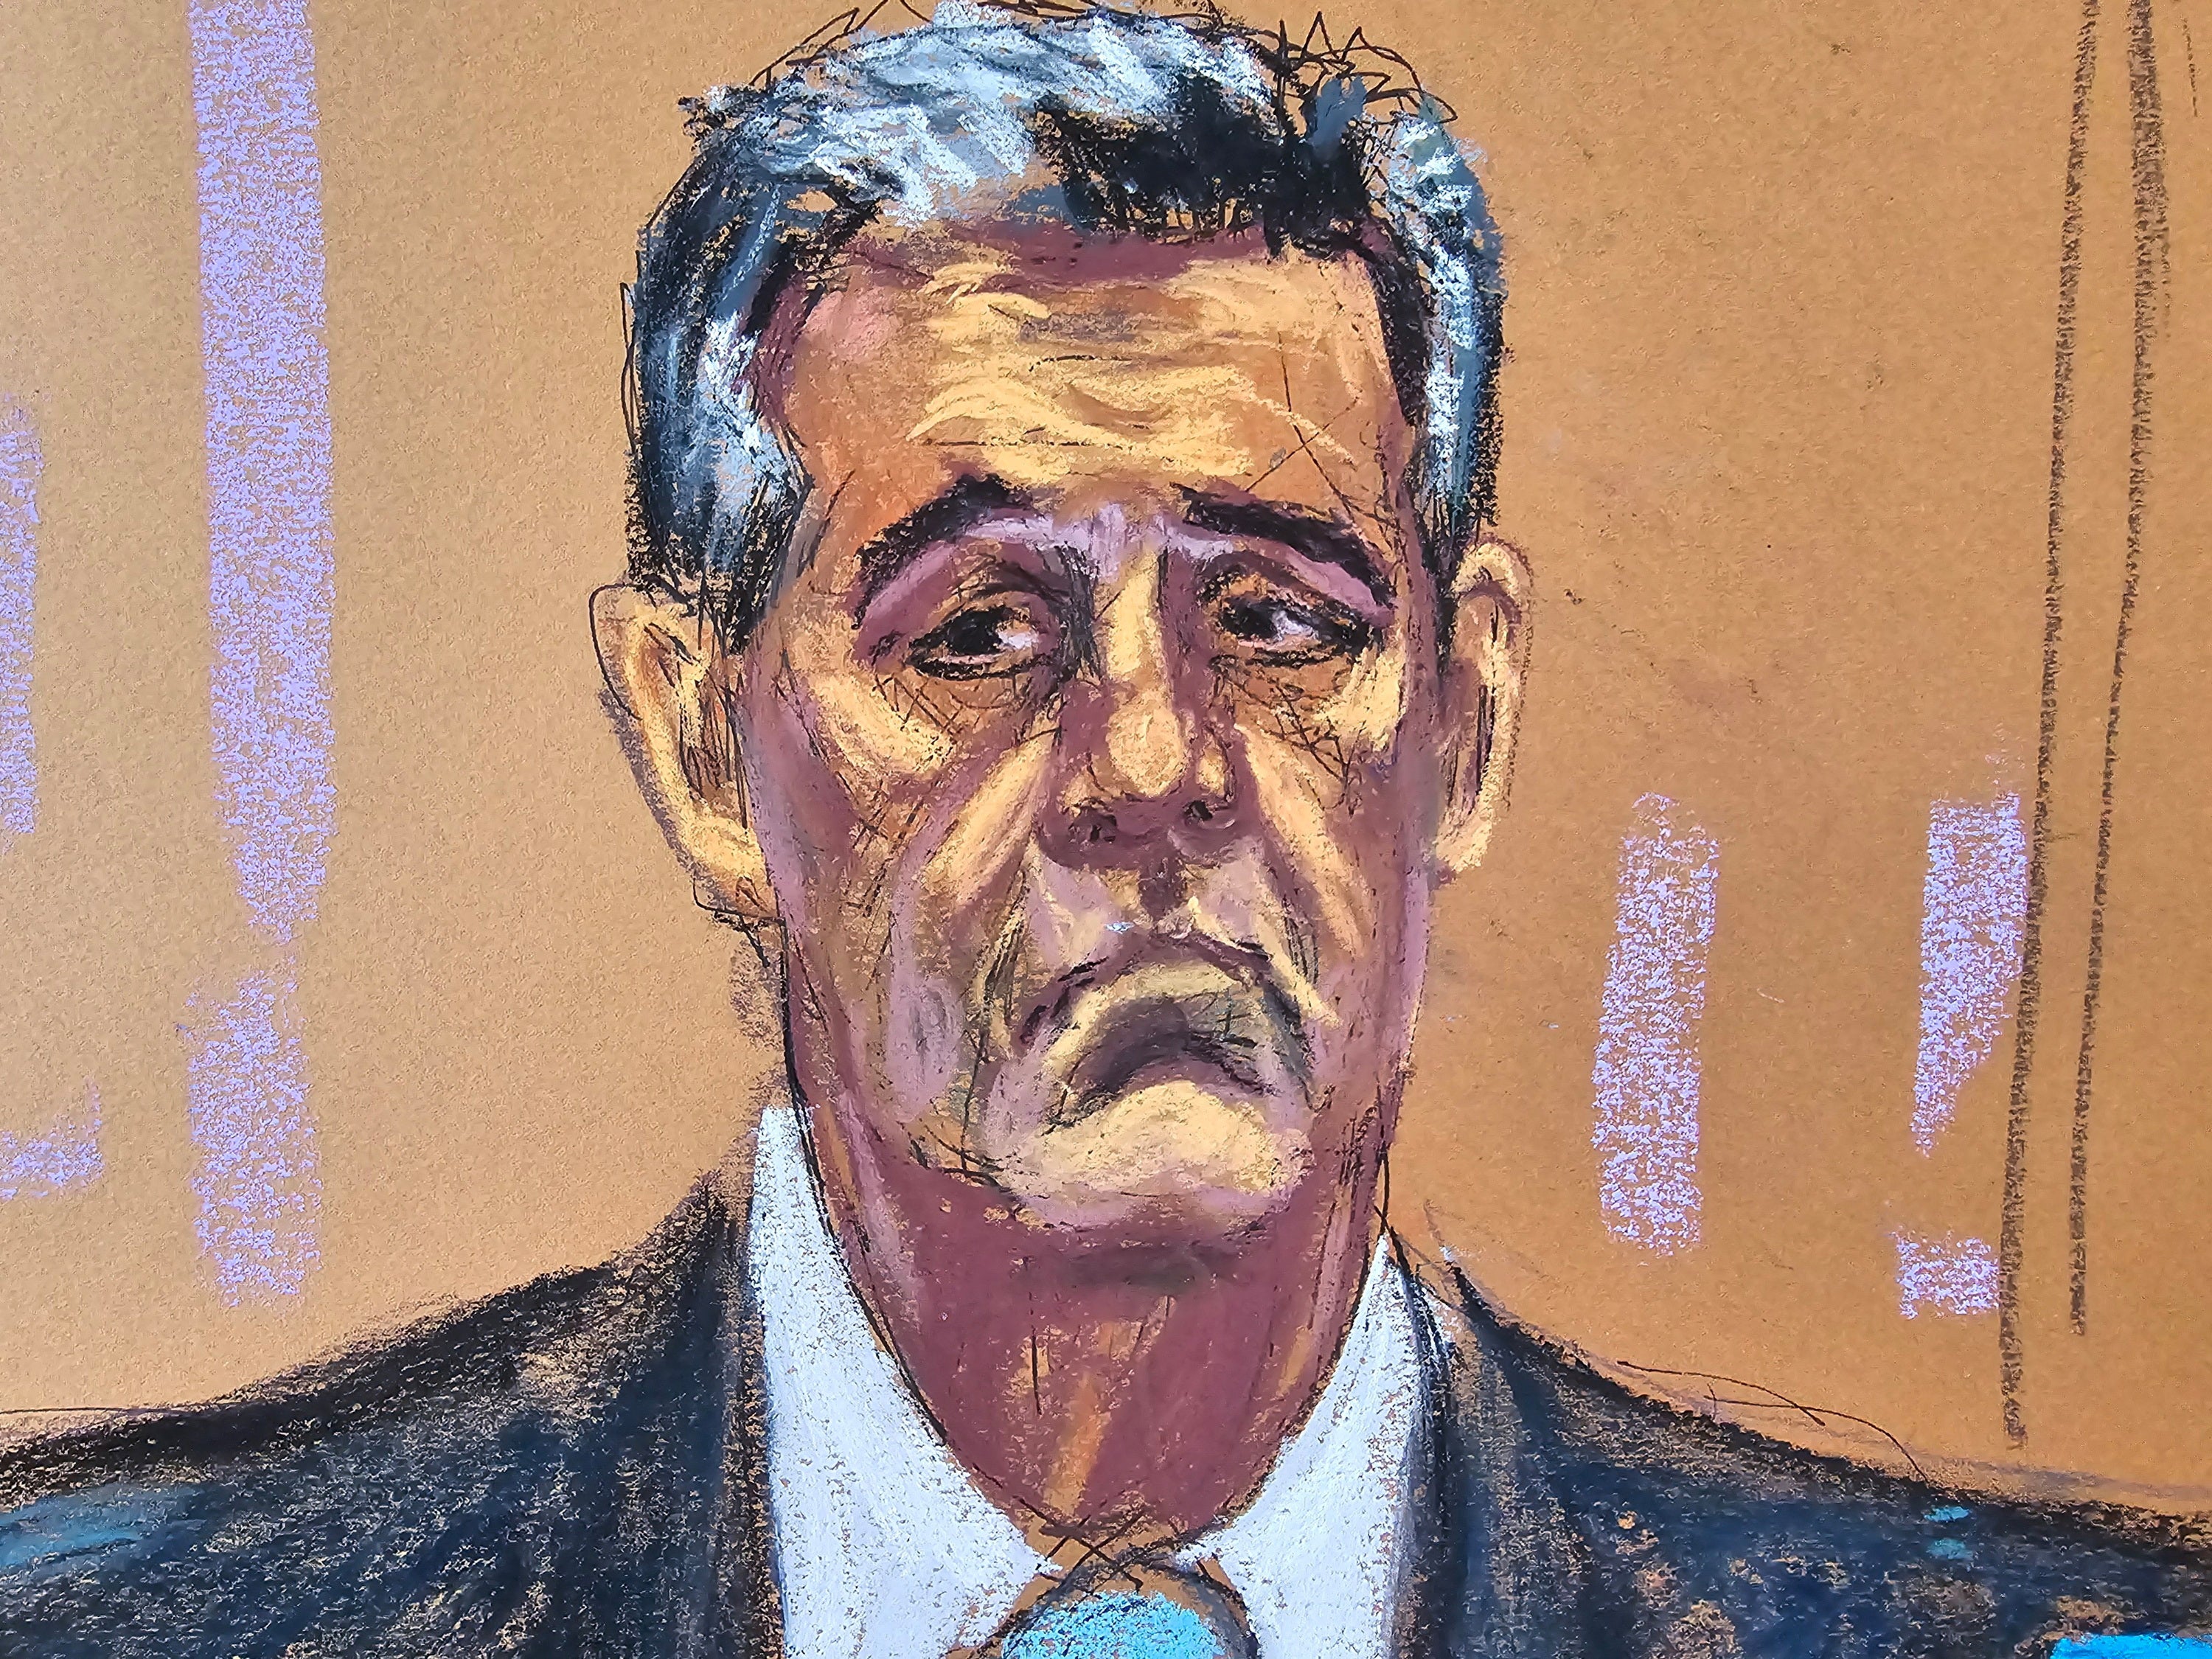 The defense started its cross-examination of Cohen on Tuesday